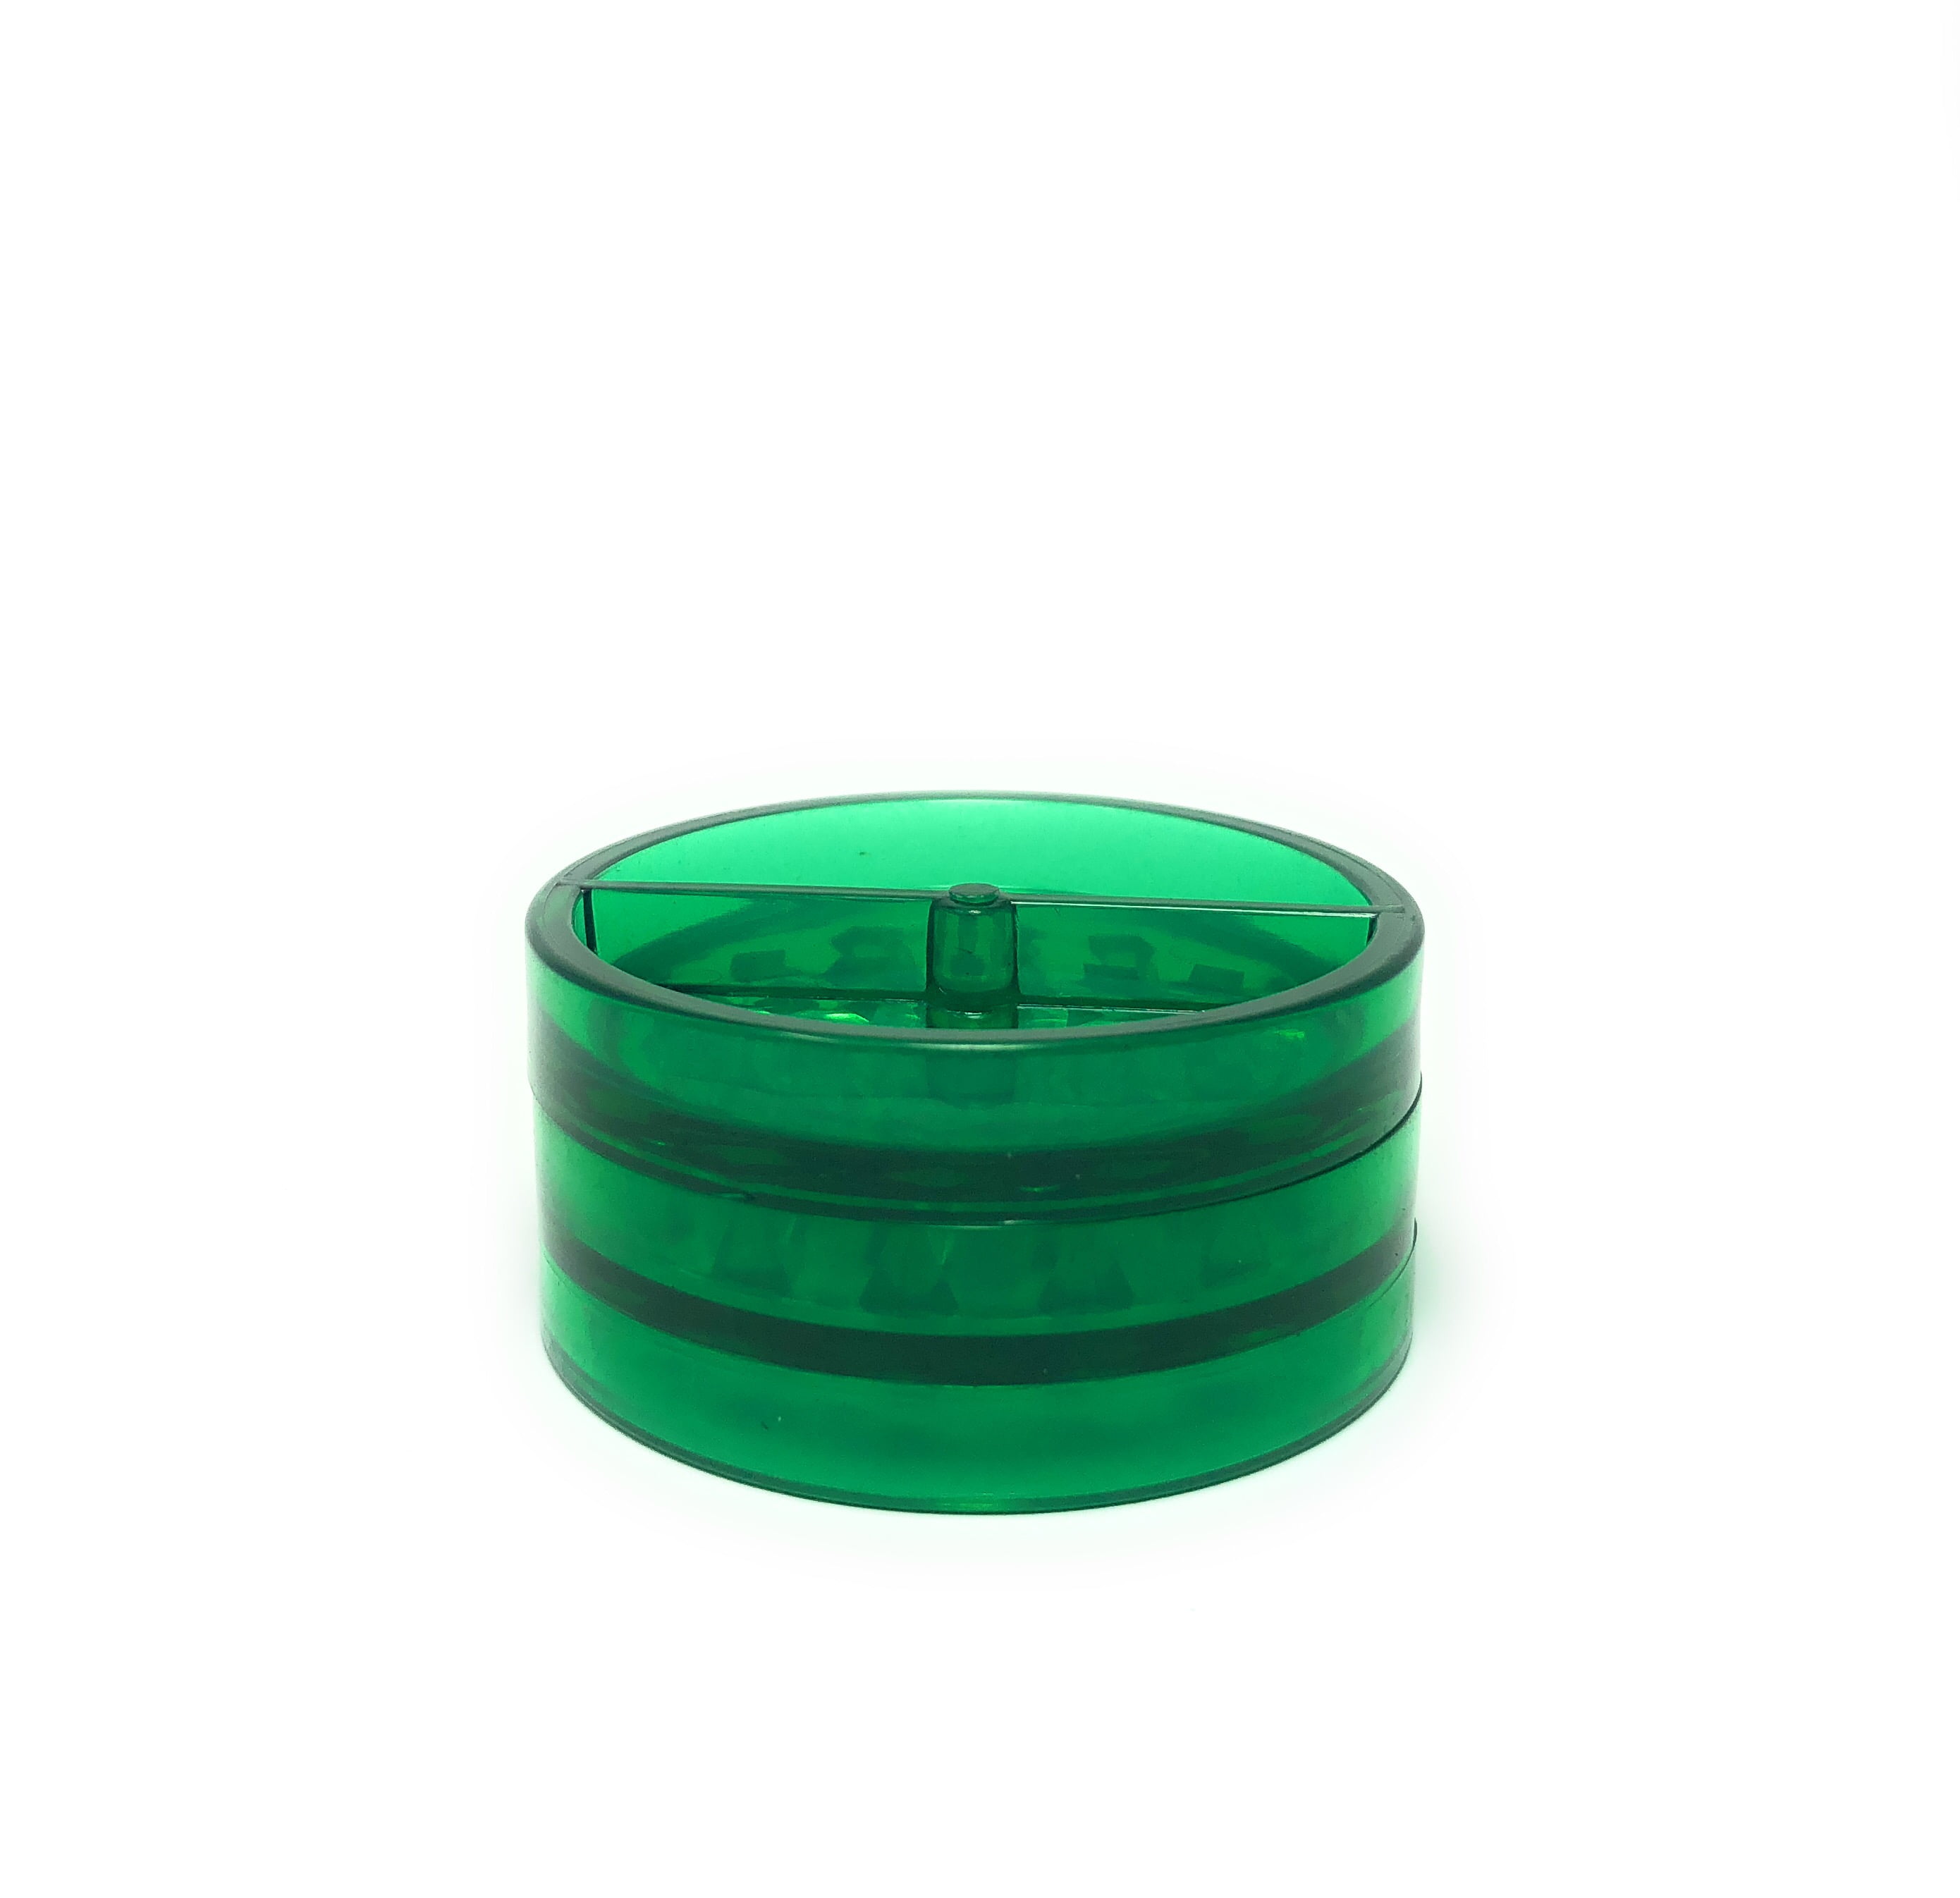 2 3/4 INCHES HARD PLASTIC 2-PIECE TOBACCO AND HERB GRINDER GREEN 